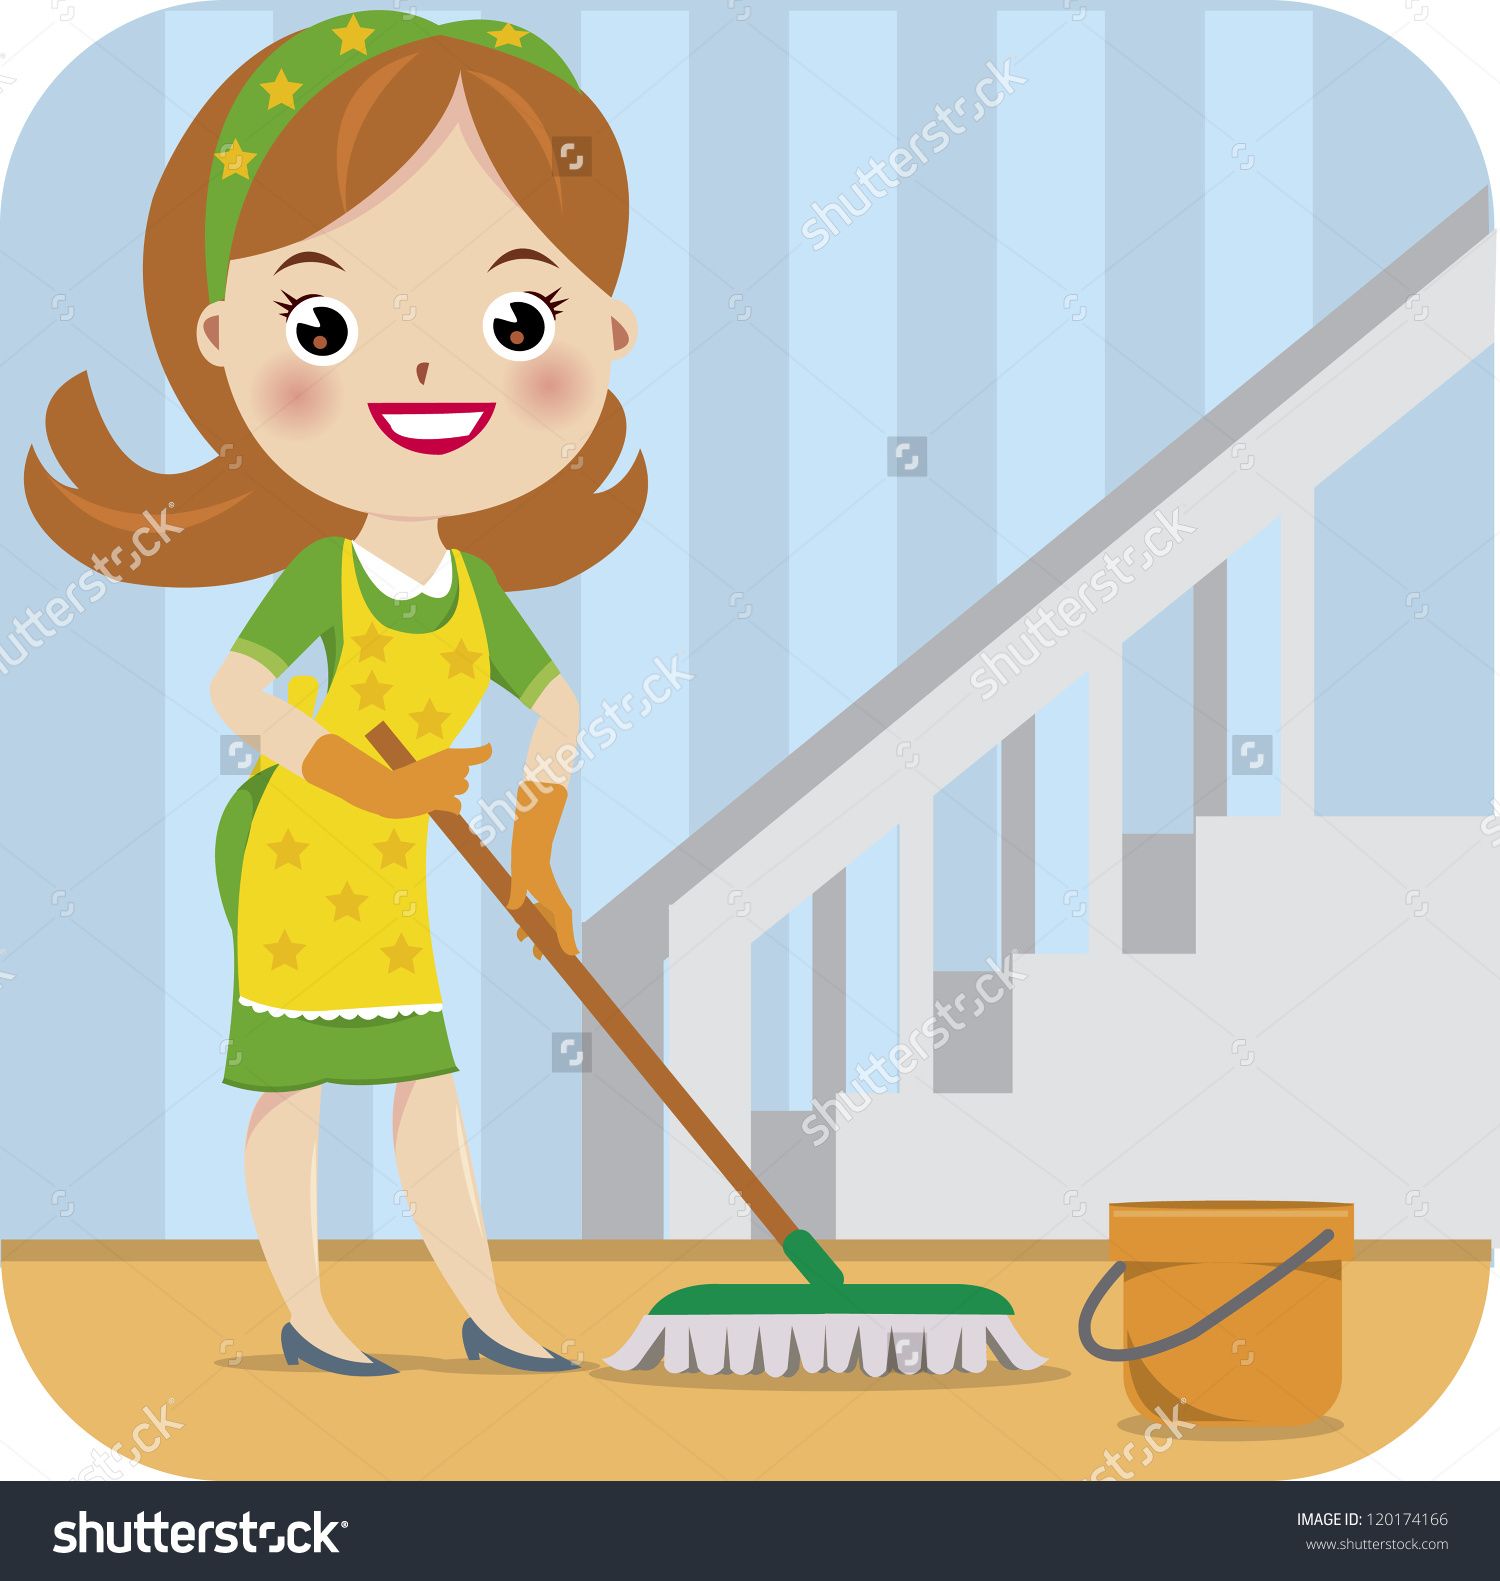 clipart children cleaning house